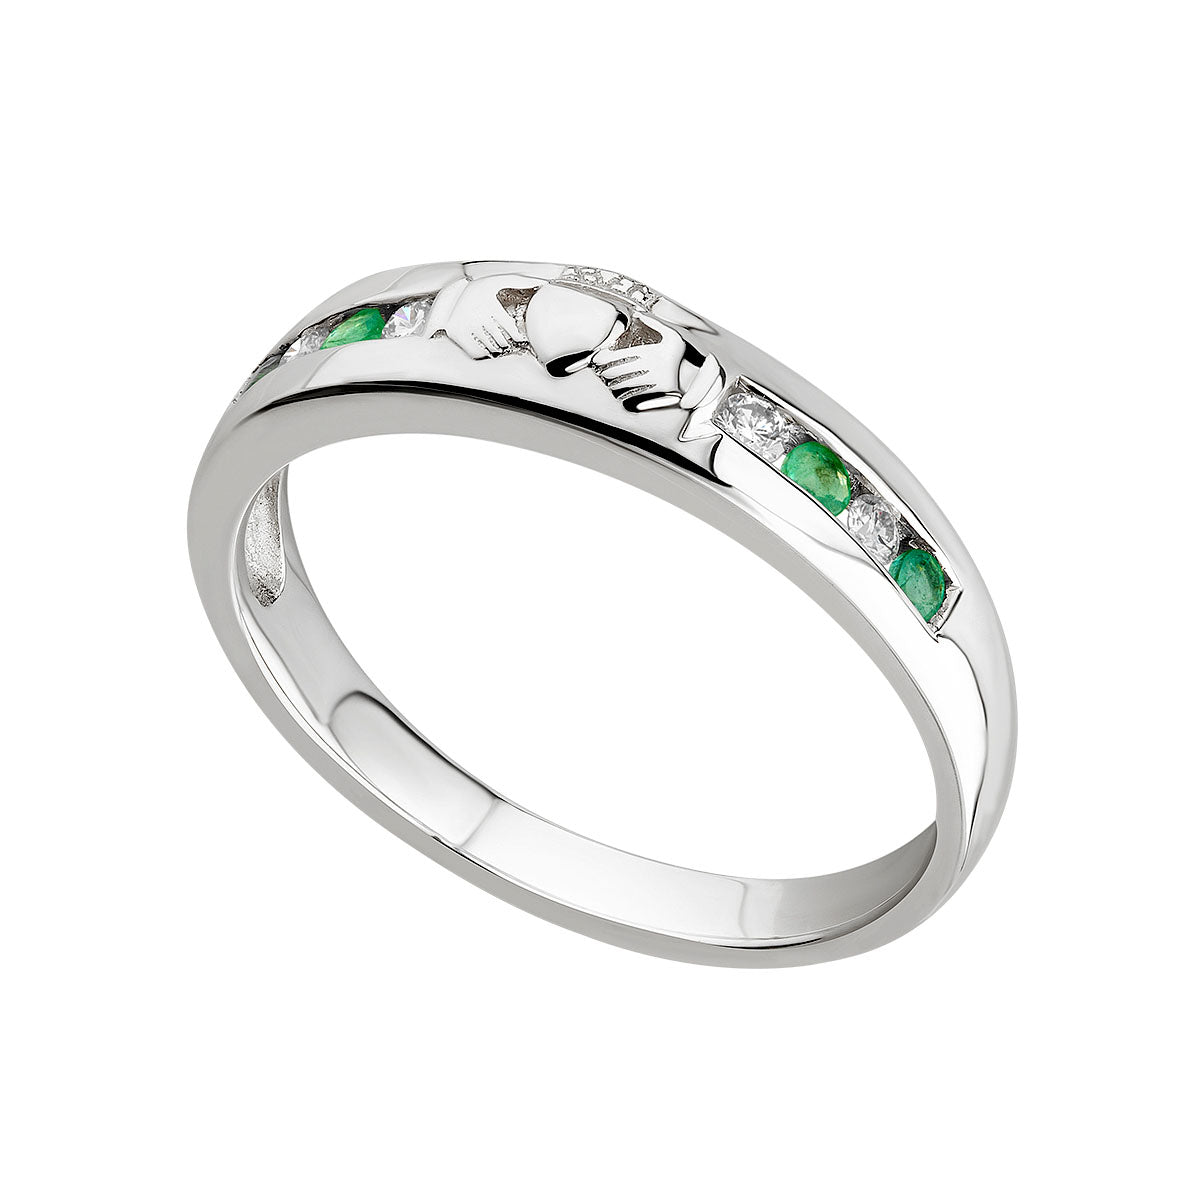 14K white gold diamond and emerald claddagh eternity ring s2620 from Solvar